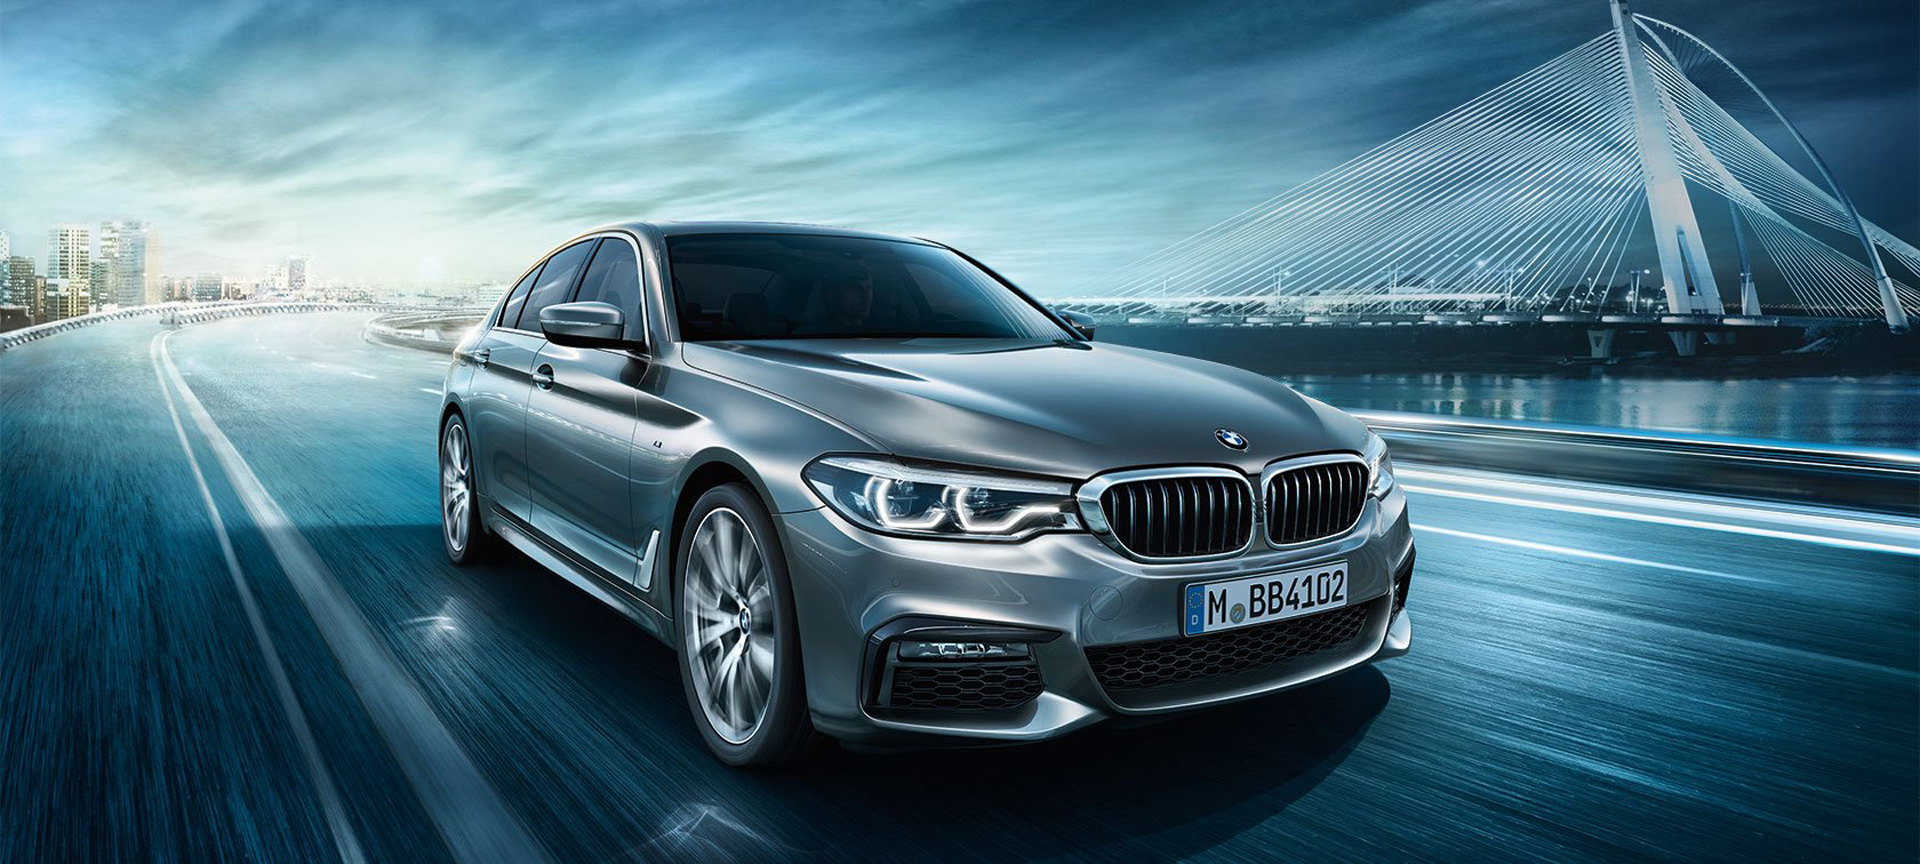 THE NEW BMW 5 SERIES.
BUILT TO OUTPERFORM.
Find out more